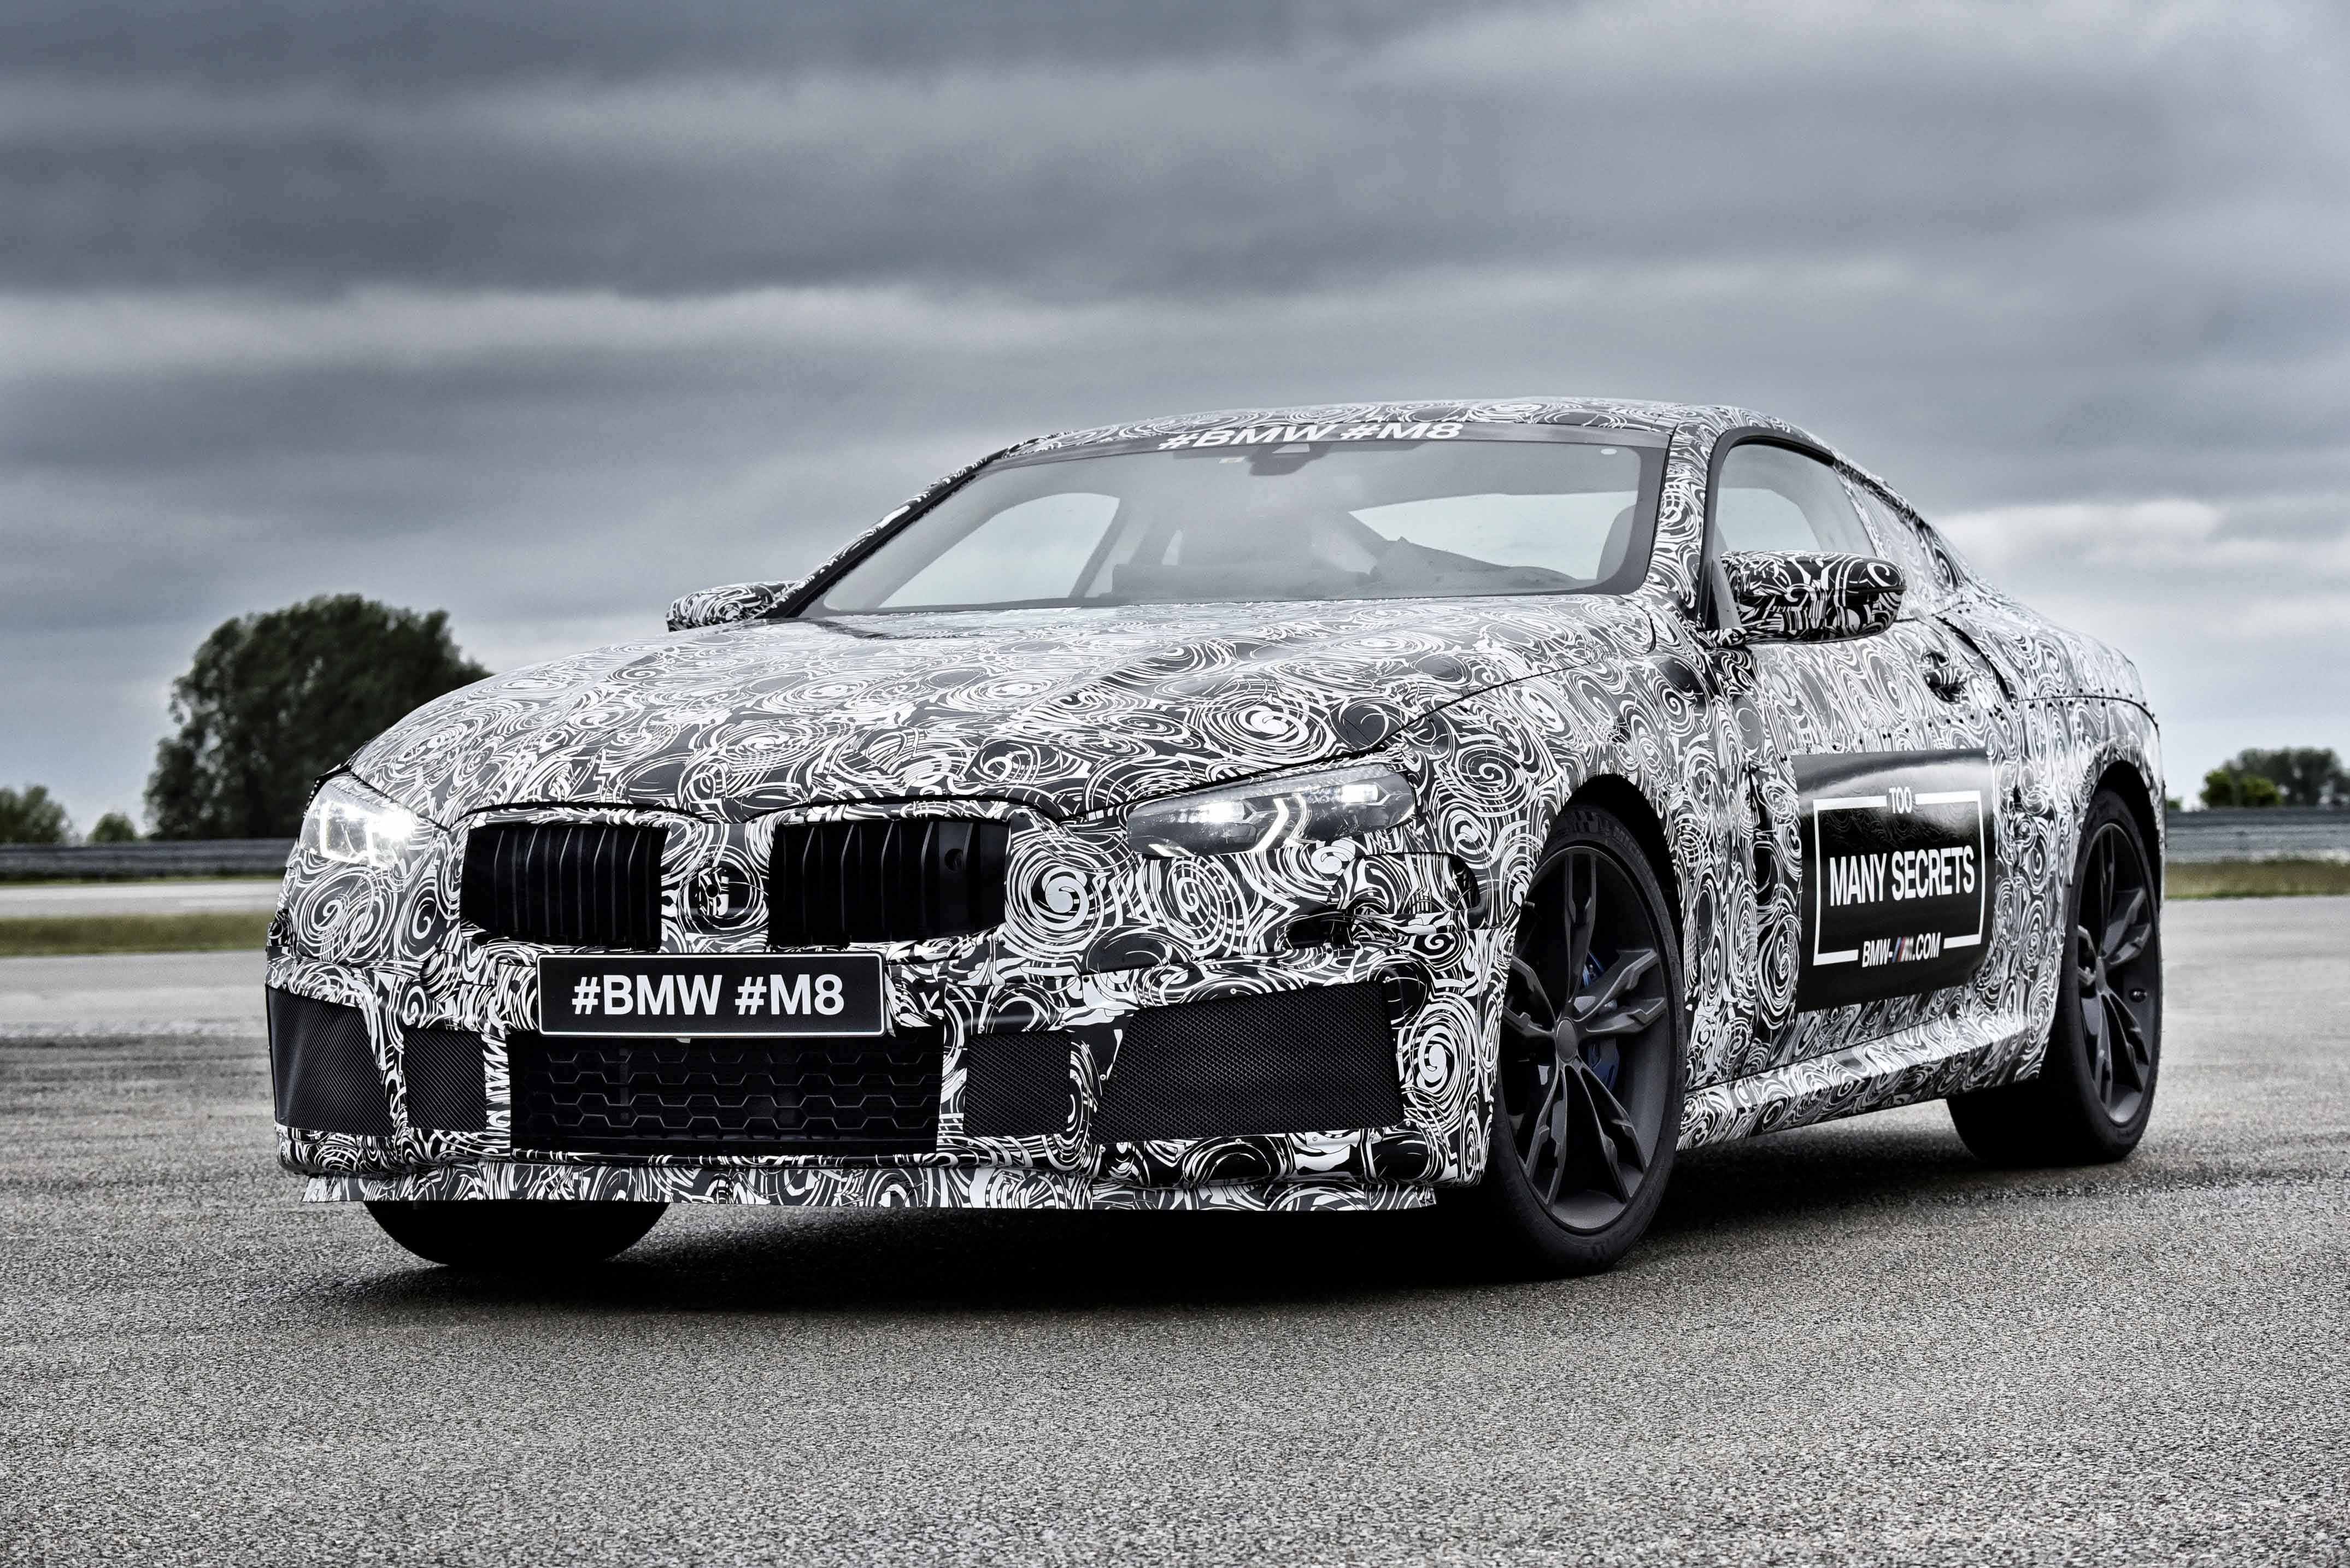 BMW M8 2018 front cross view